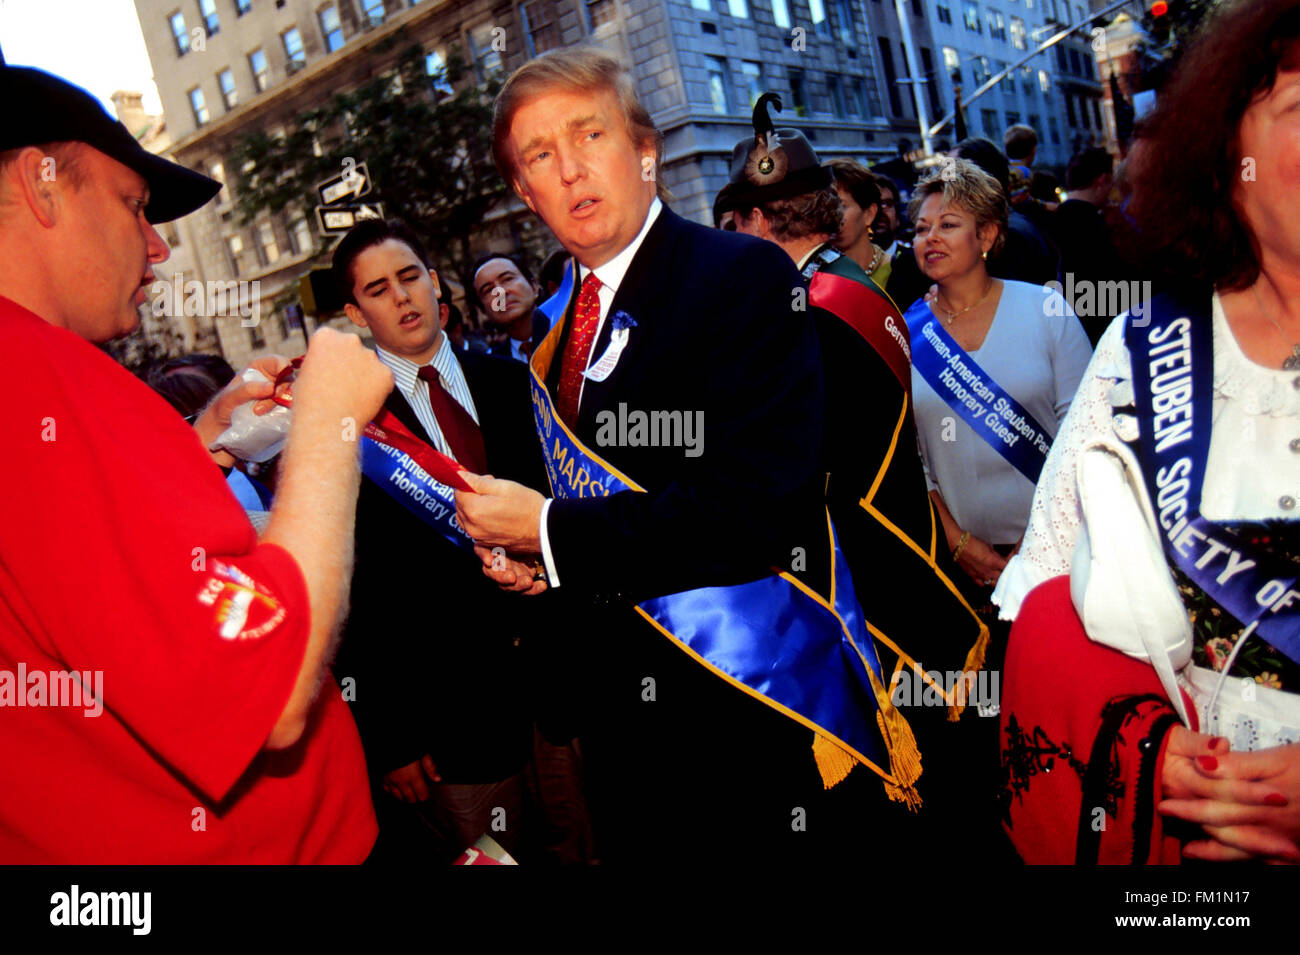 Real Estate Developer Donald Trump receives a ceremonial medal before marching as the Grand Marshal in the 42nd Annual Steuben Day Parade on September 18, 1999. Donald Trump owns considerable real estate in New York City and in Atlantic City and is under investigation by the New York State Lobbying Commission for illegal lobbying by trying to kill casino related legislation in Albany. (© Richard B. Levine) Stock Photo